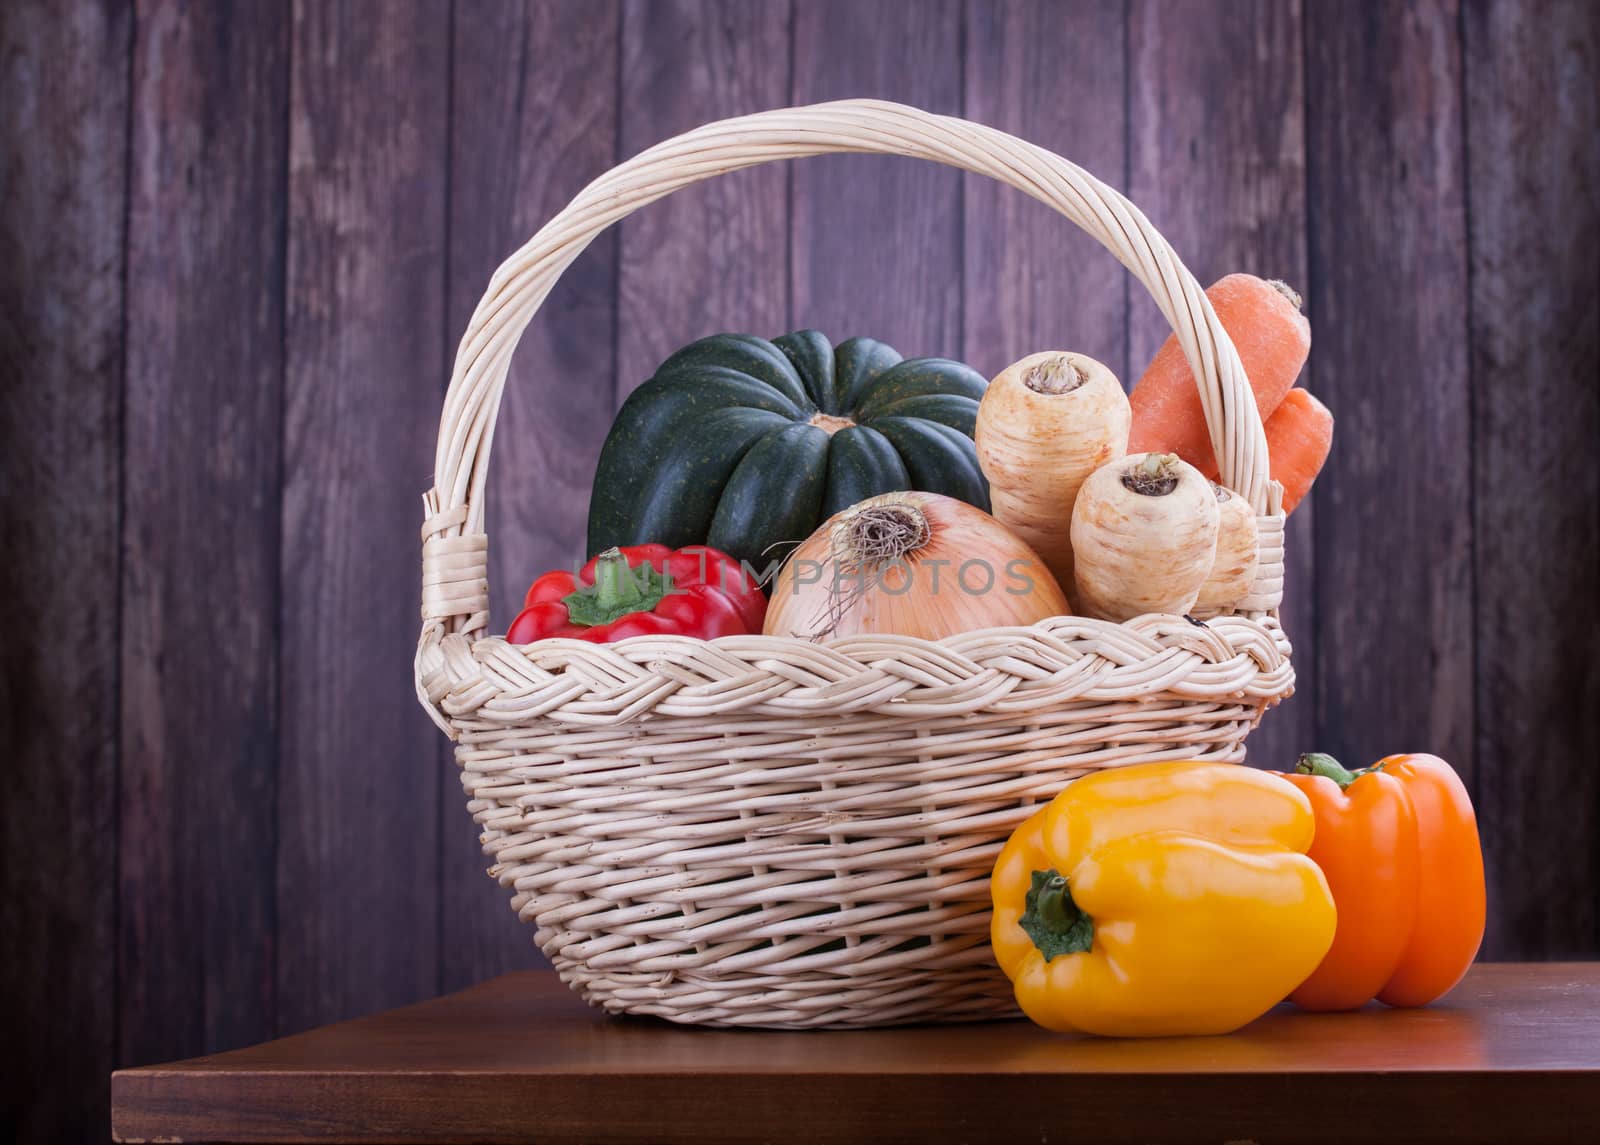 vegetables in a basket by lanalanglois